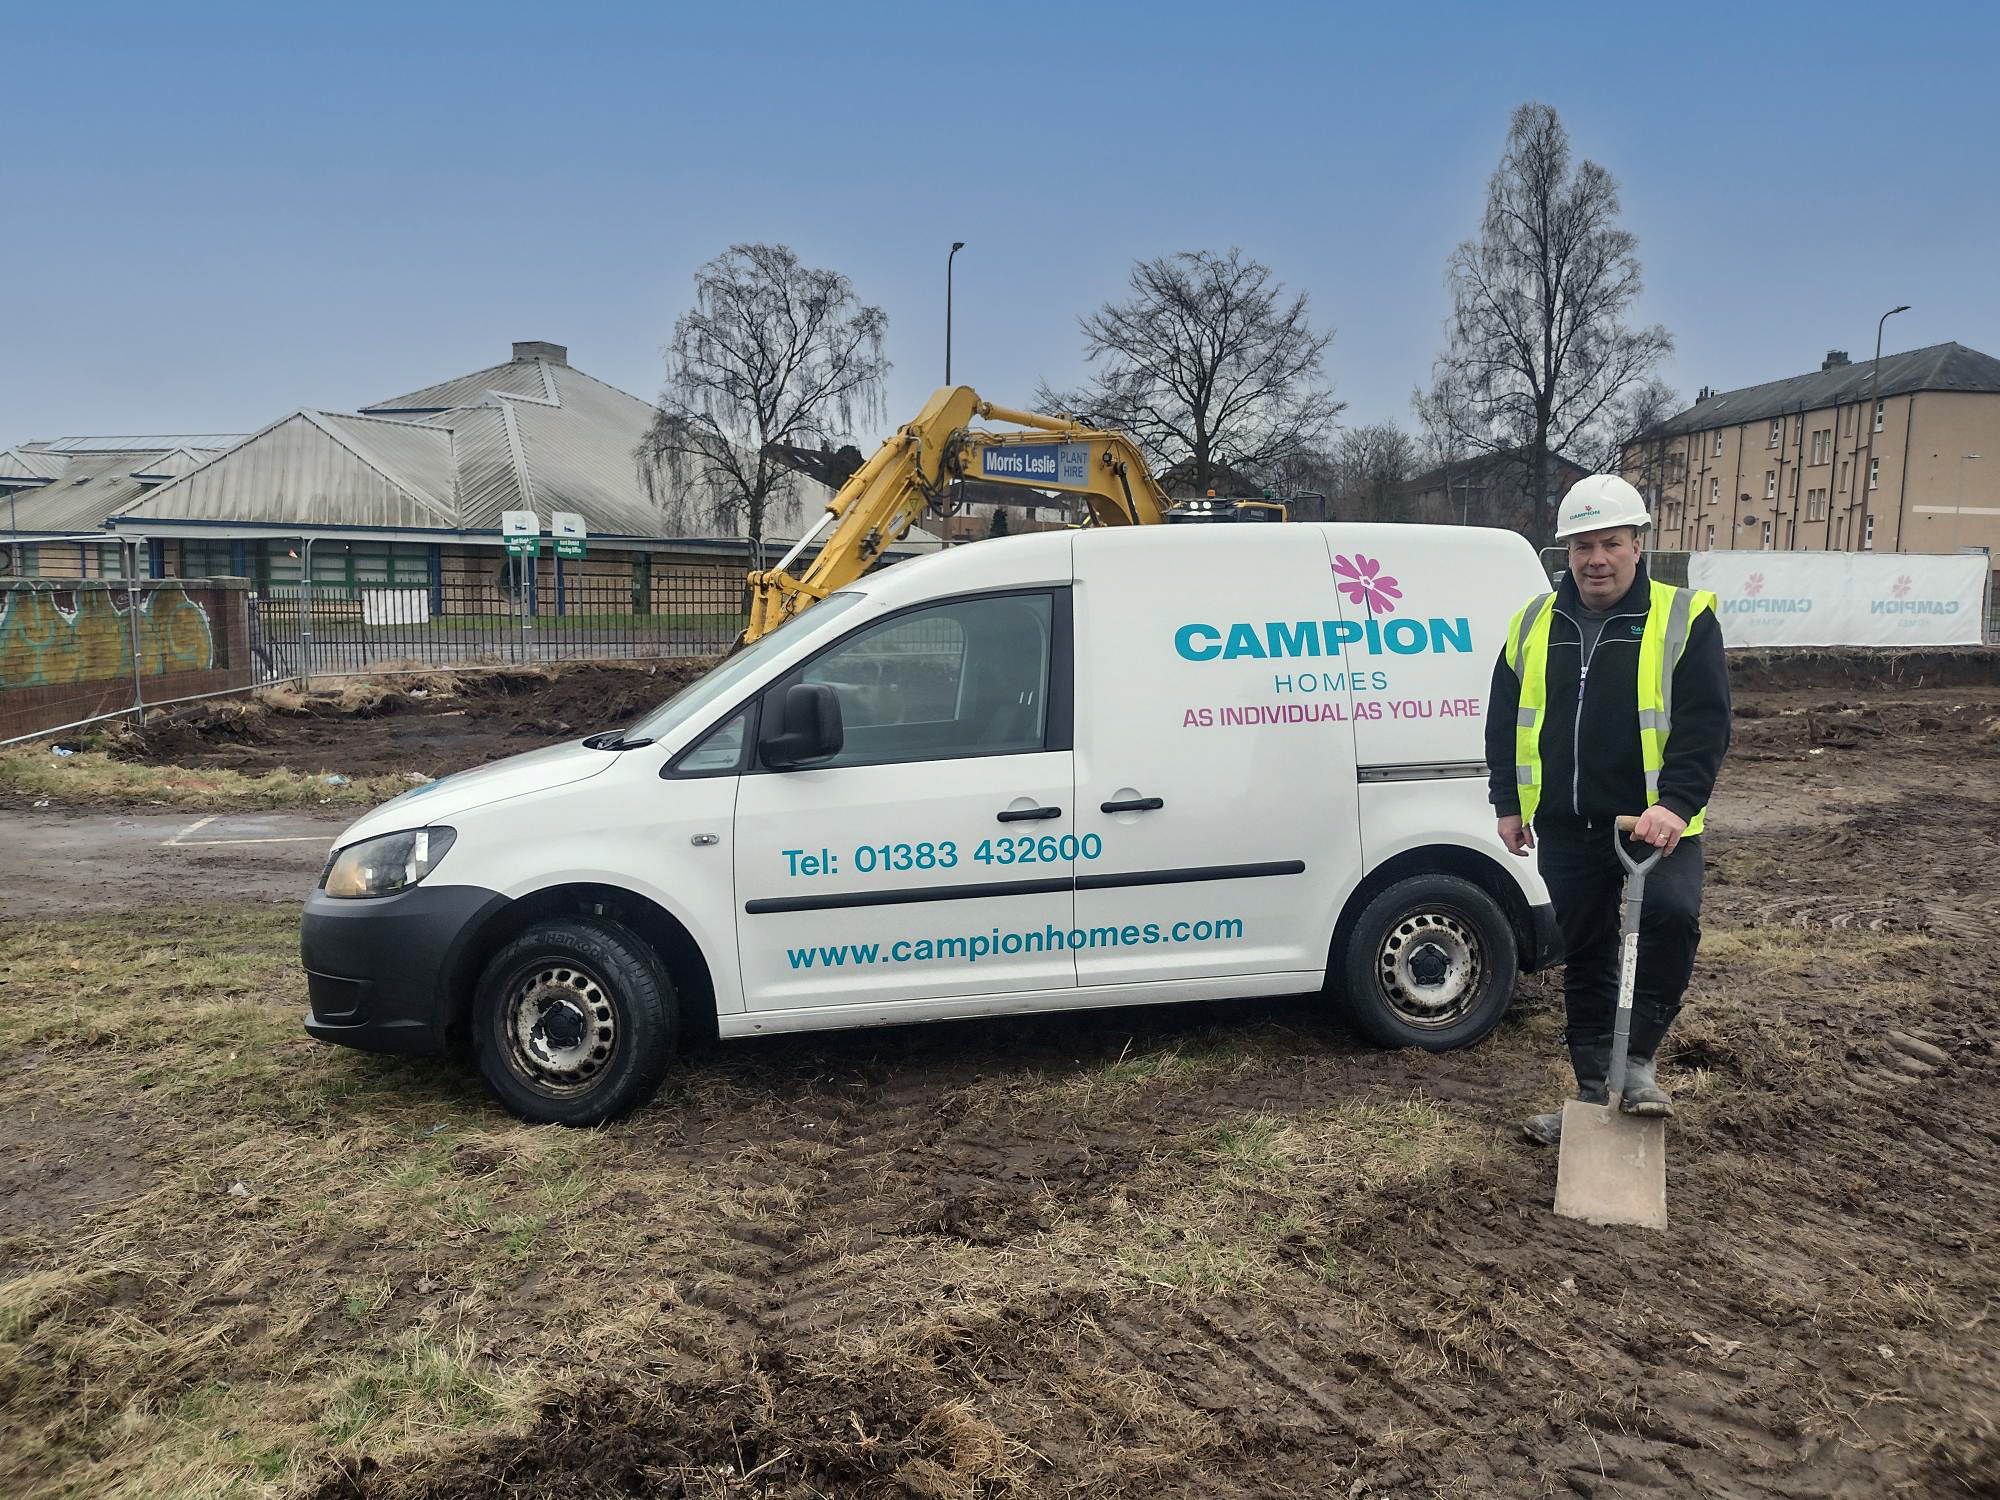 Campion to bring almost 100 accessible homes to Fife and Dundee